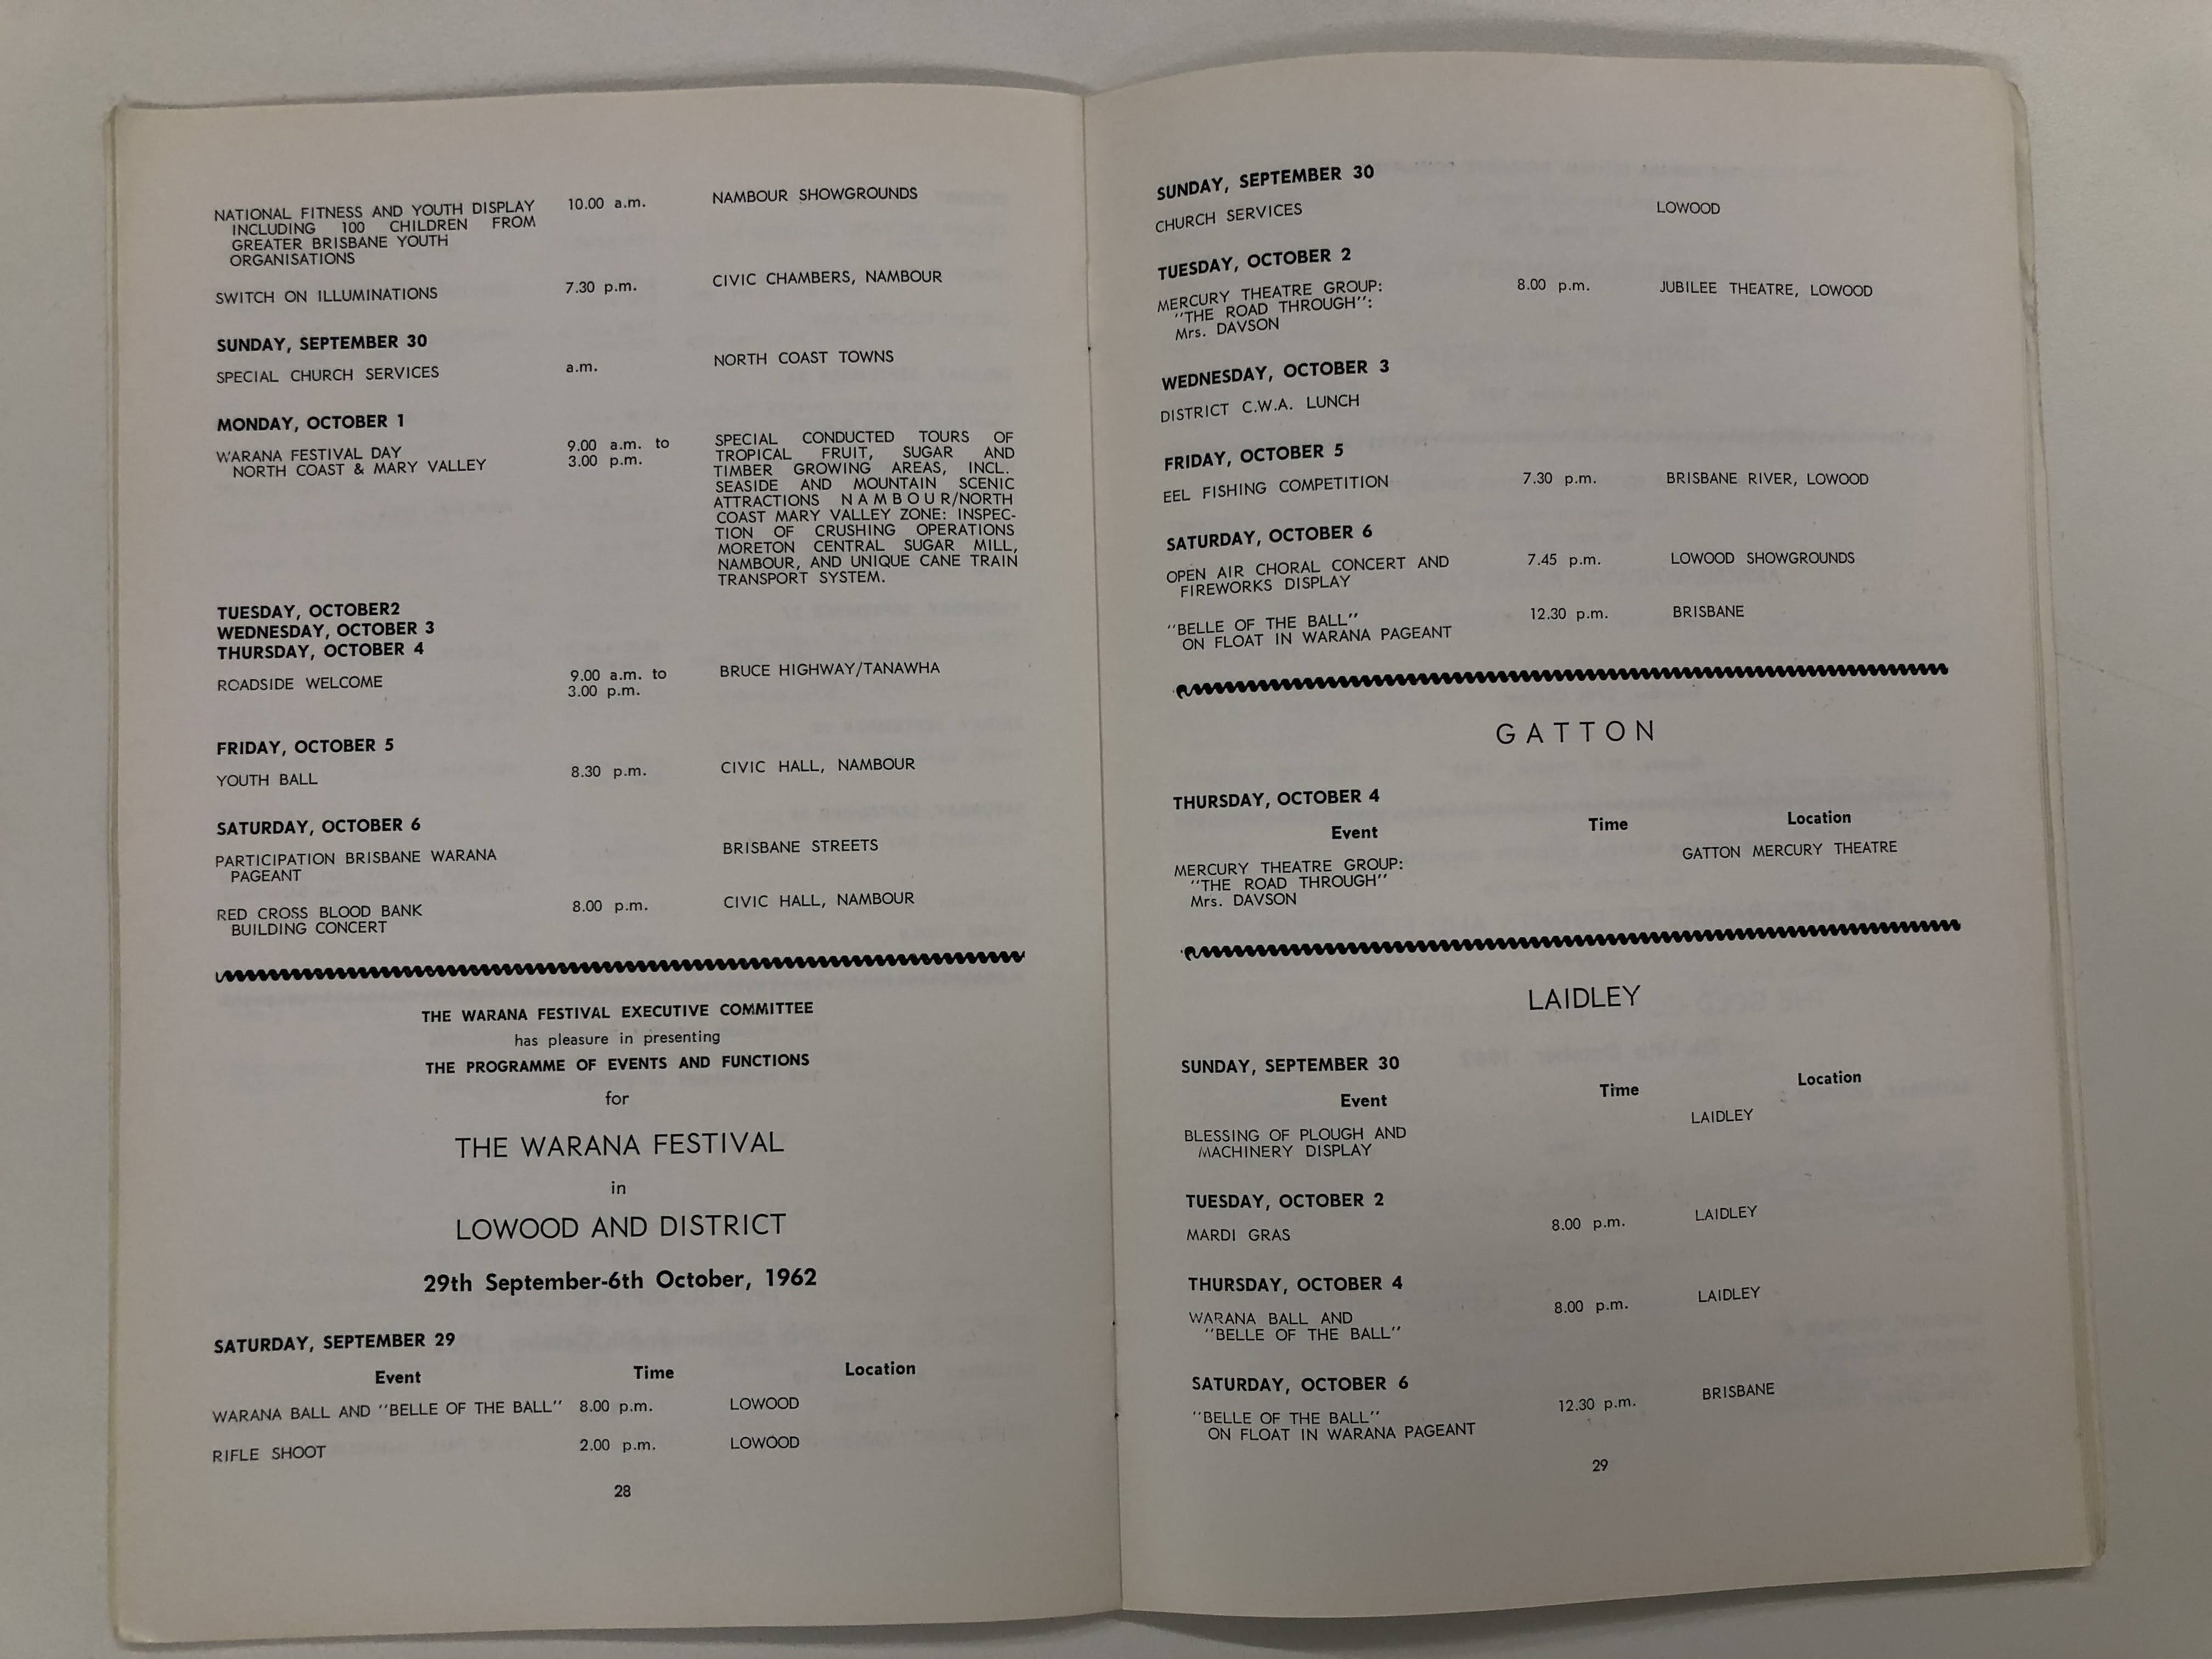 Programme of Events, Lowood and District, Warana Festival, 29th September - 6th October 1962.